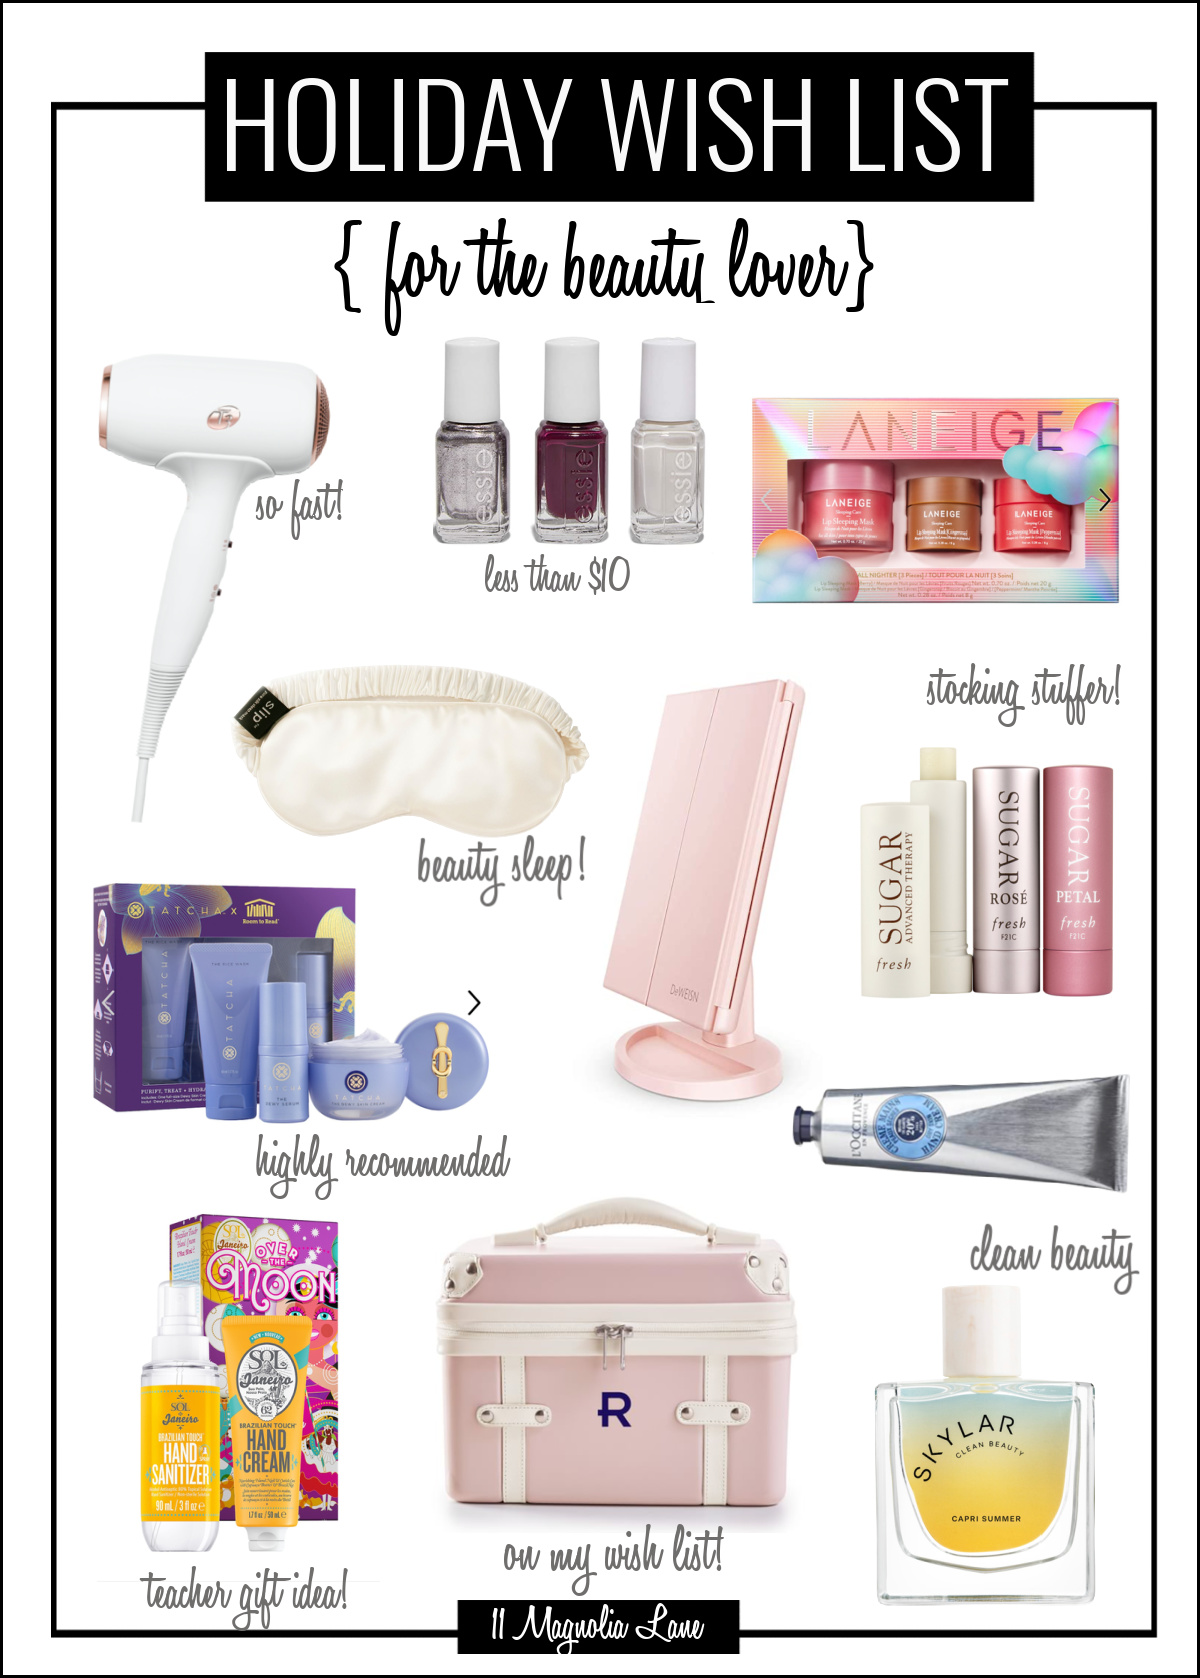 Holiday Wish List Gift Ideas for the Beauty Lover